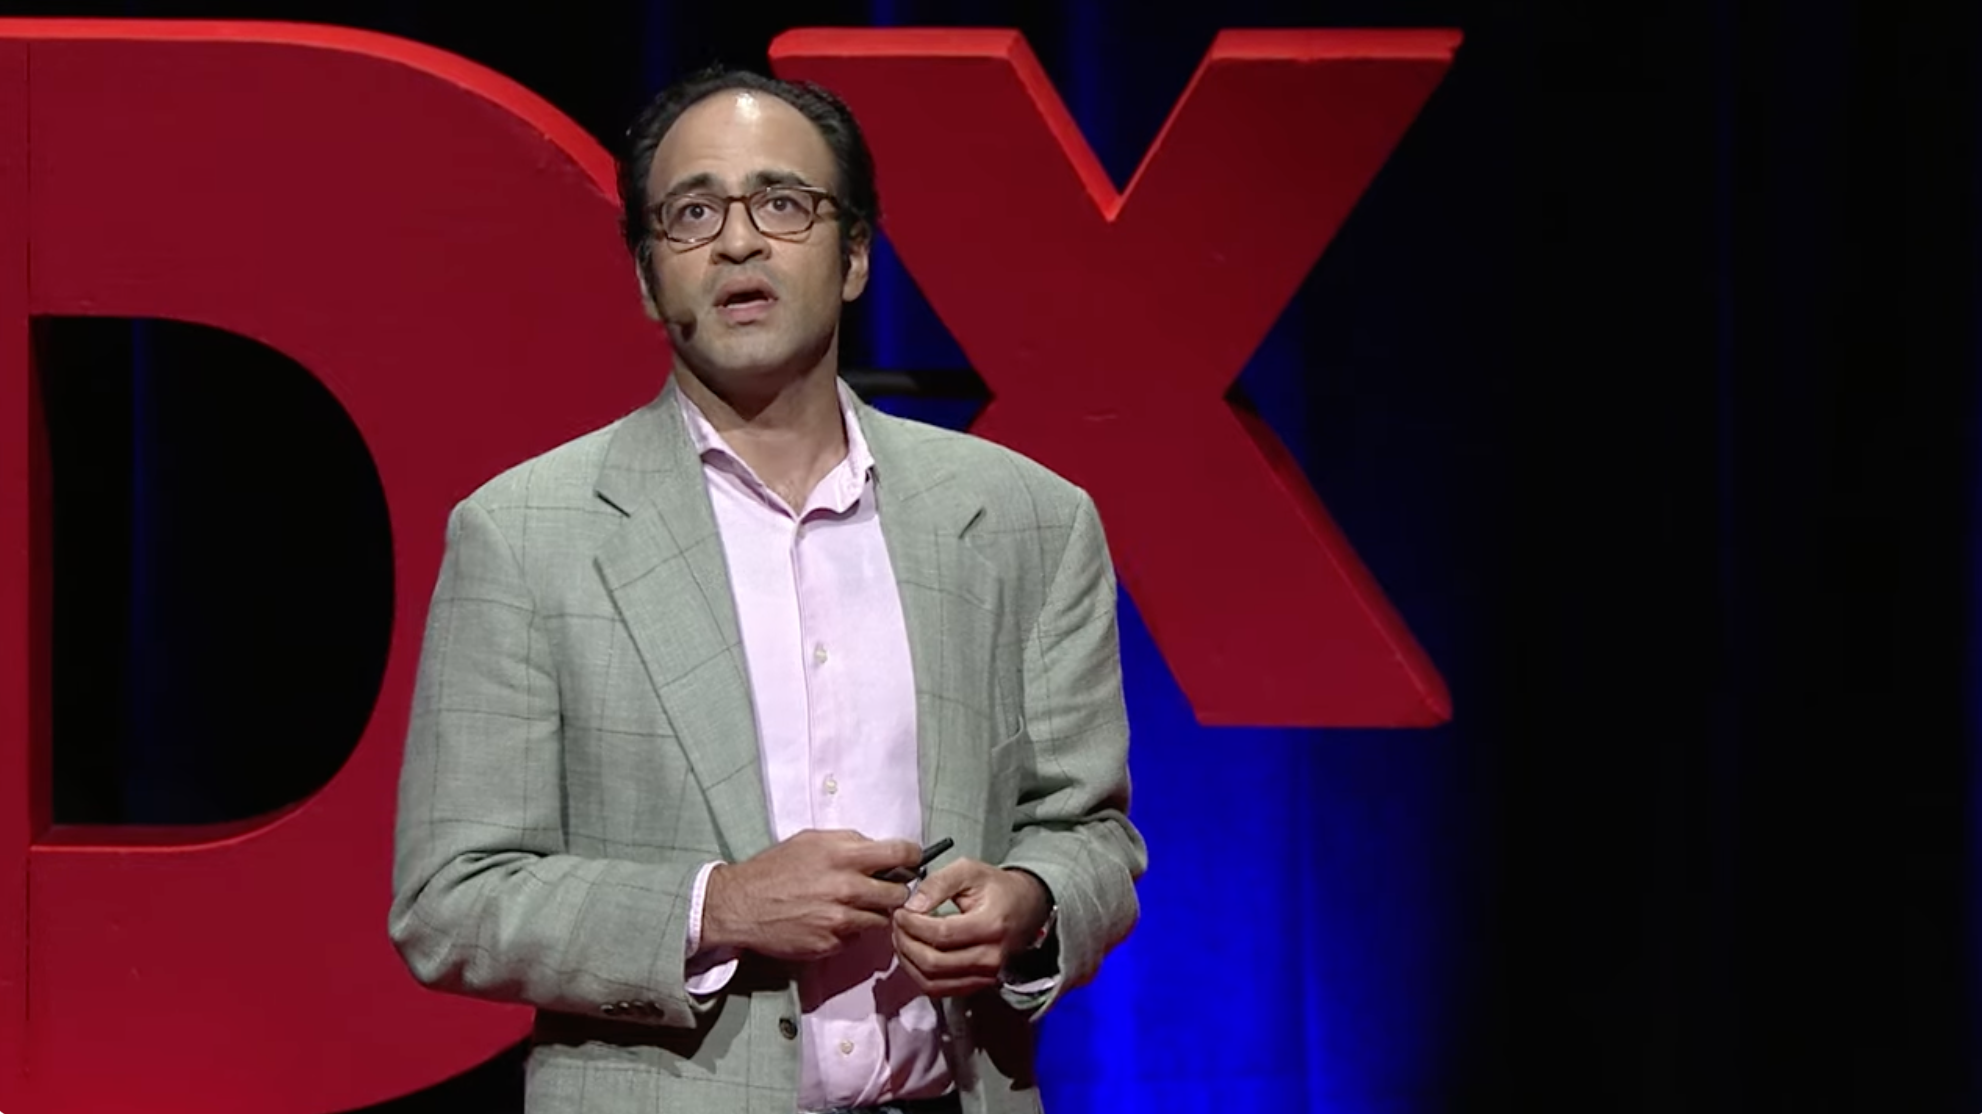 Screen shot of a South Asian man in a suit mid-sentence in front of the TEDx logo on stage.